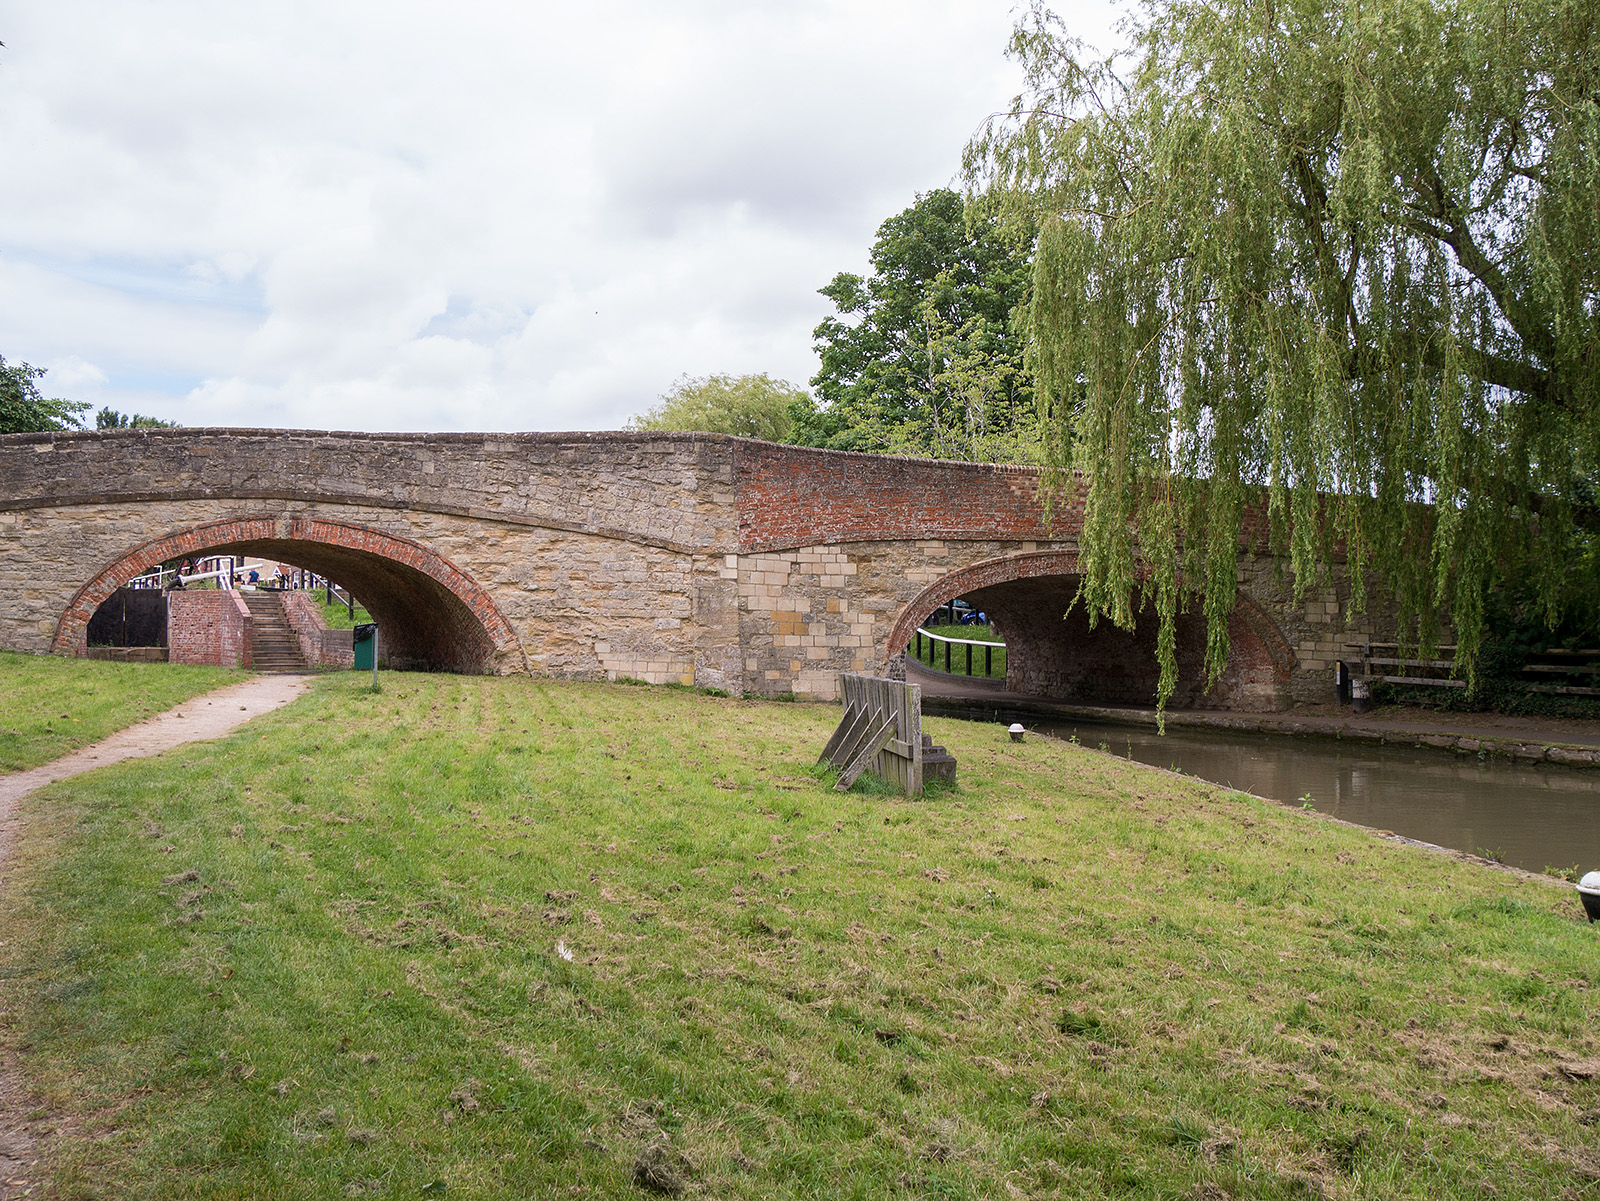 Double bridge at Stoke Bruerne - note the different constructions